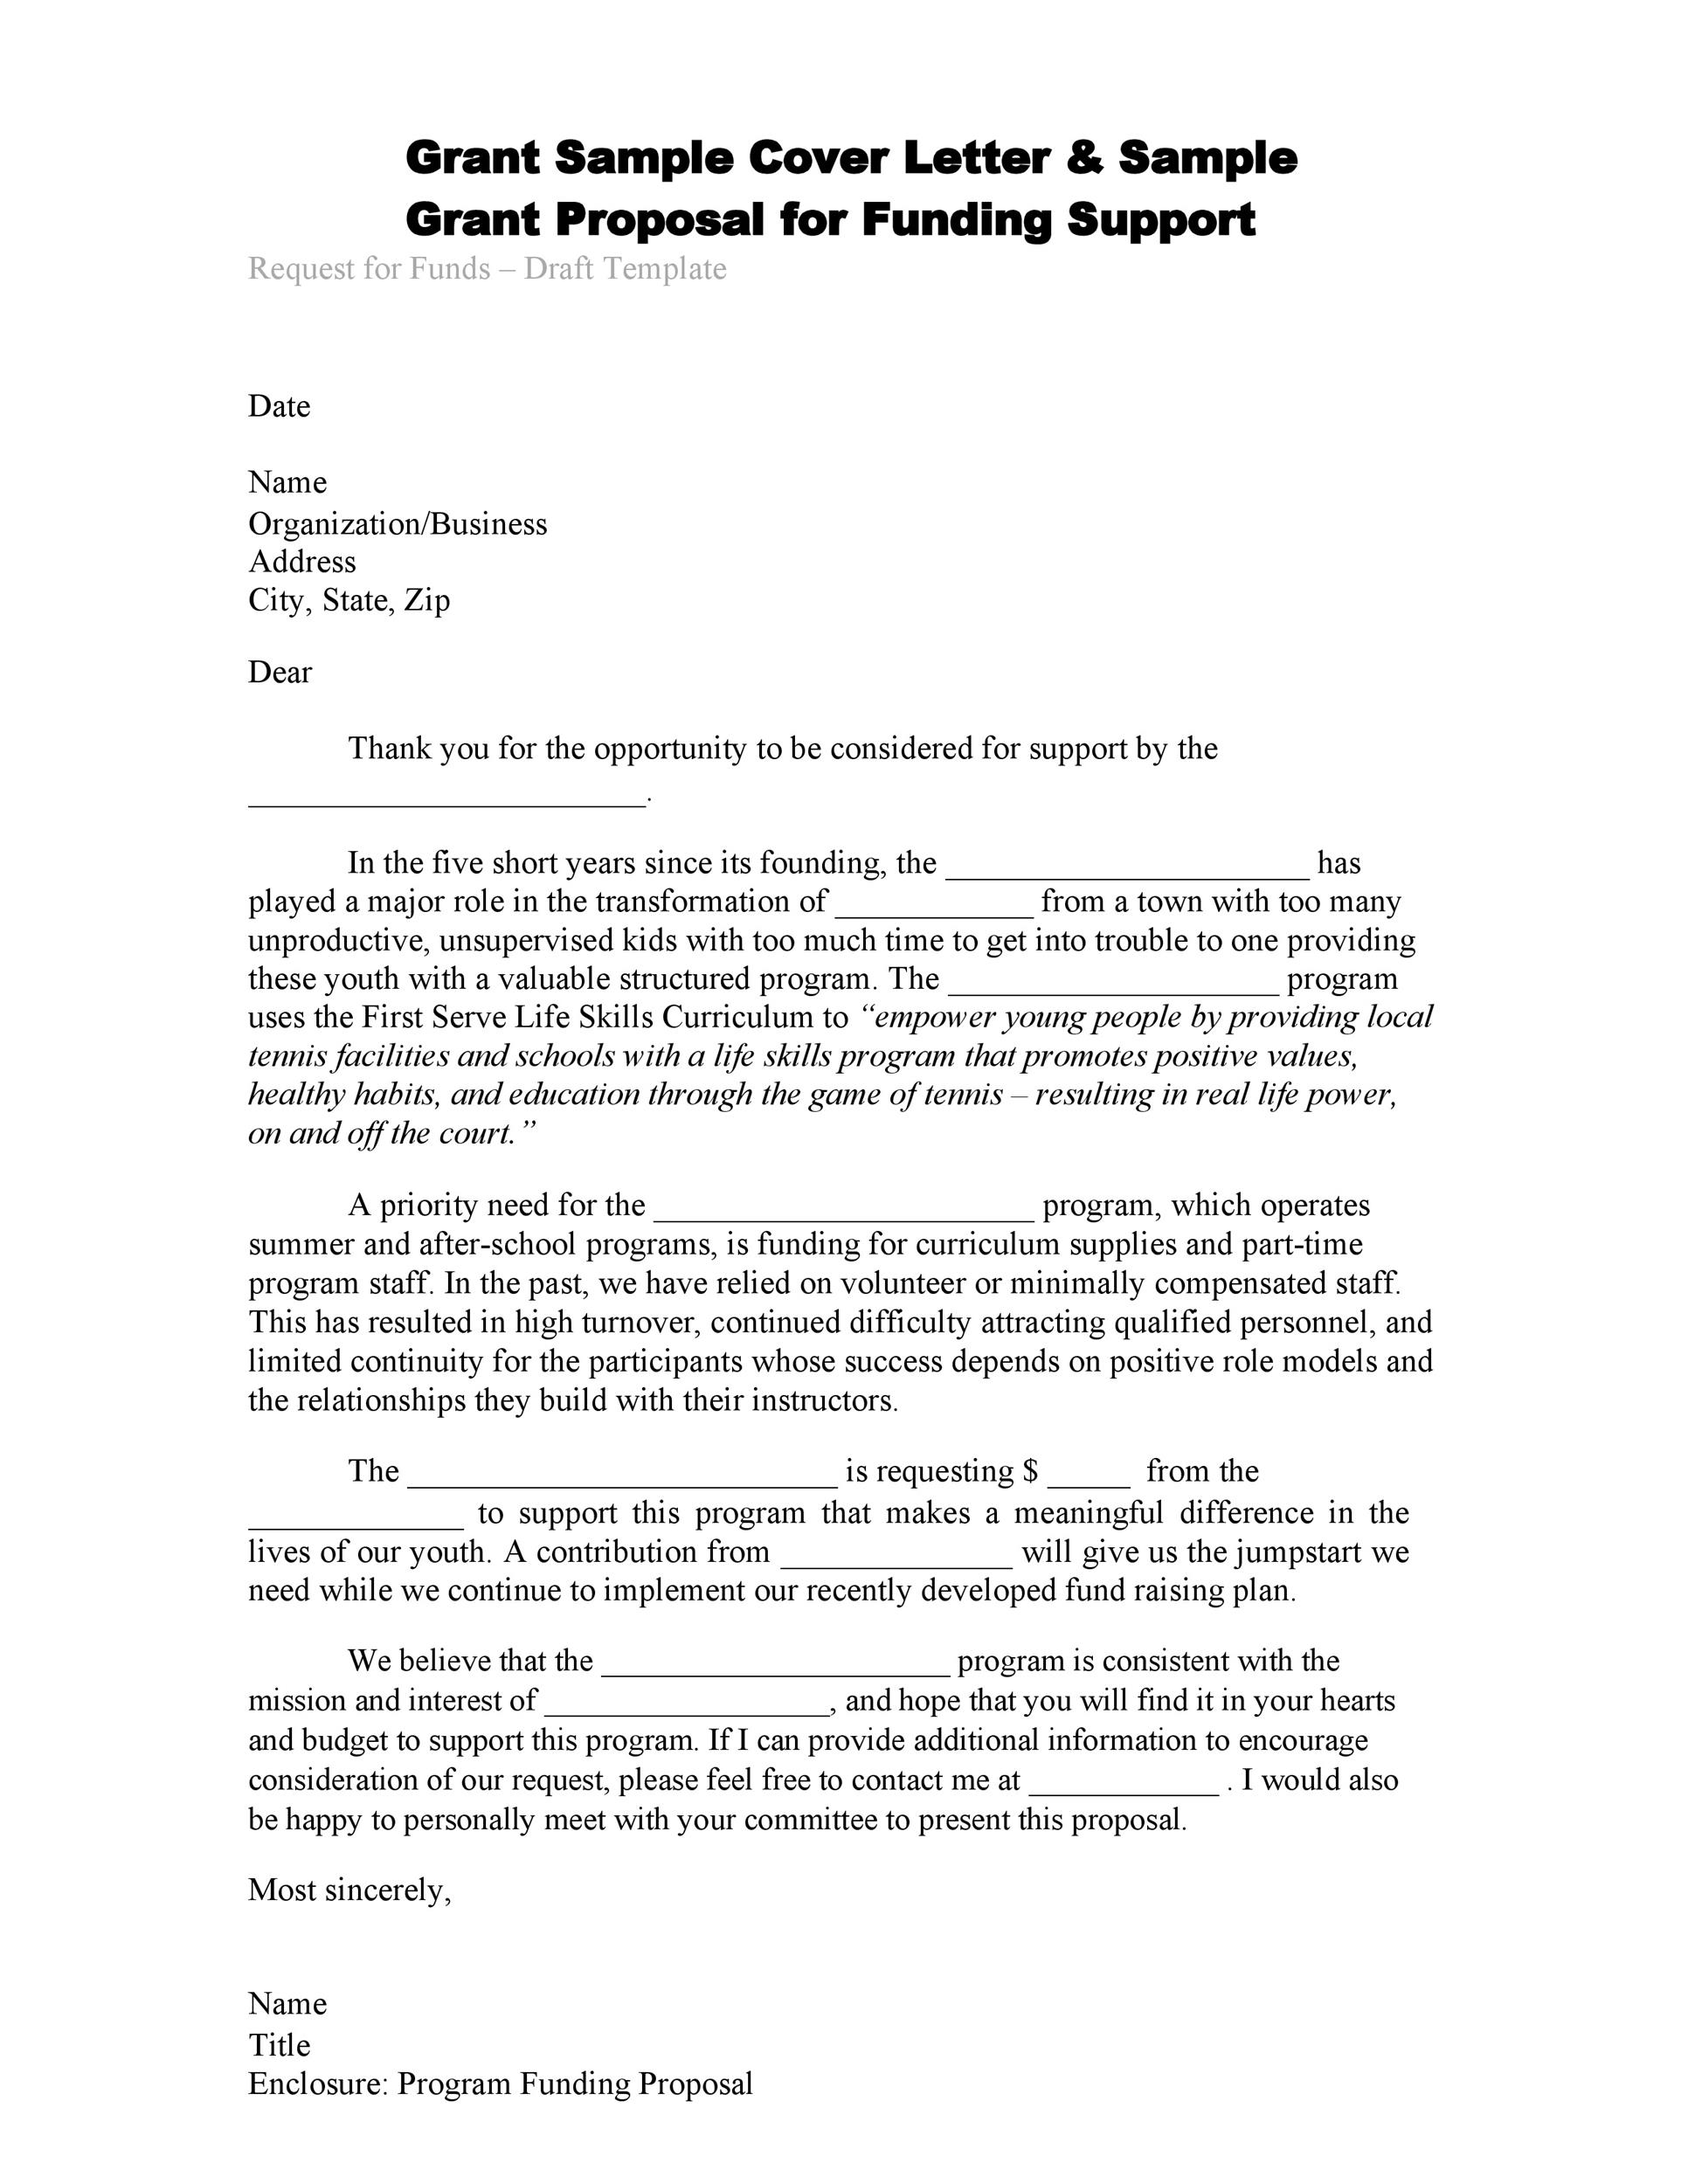 Free Grant Proposal Cover Letter Template - How to Write a ...